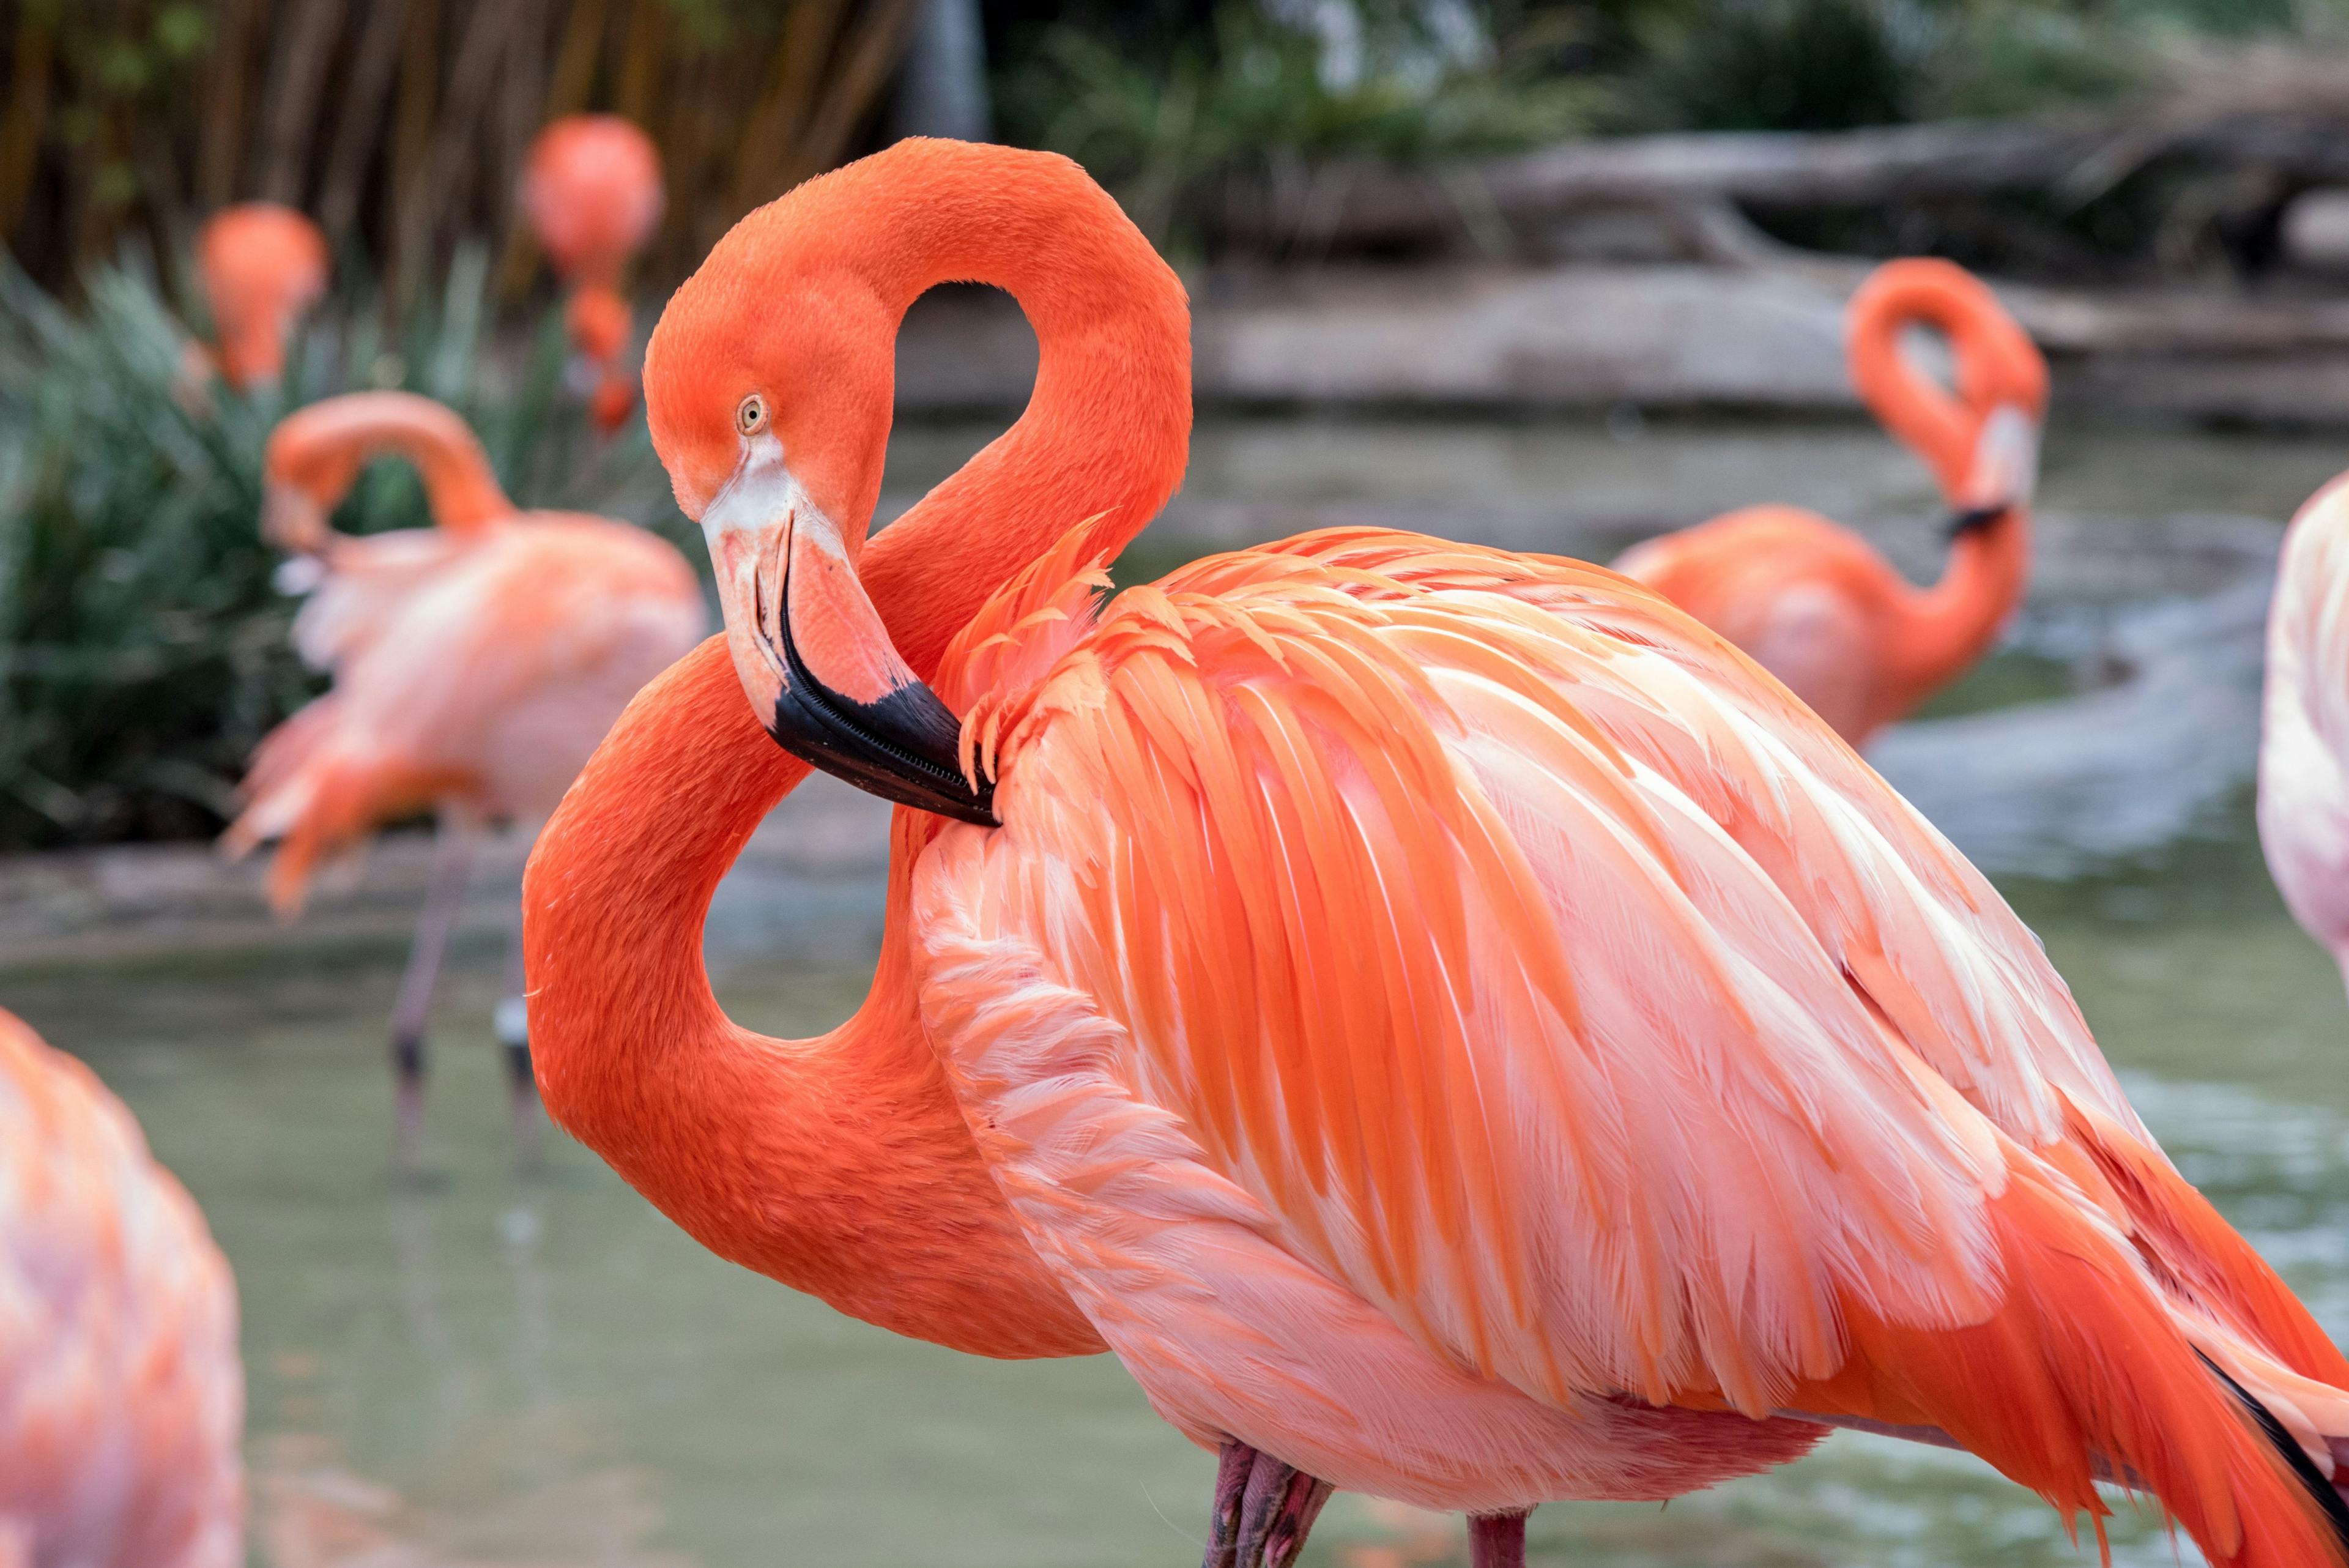 Flamingo with head and neck curved into a figure 8 | Image Credit: © The Speedy Butterfly - stock.adobe.com